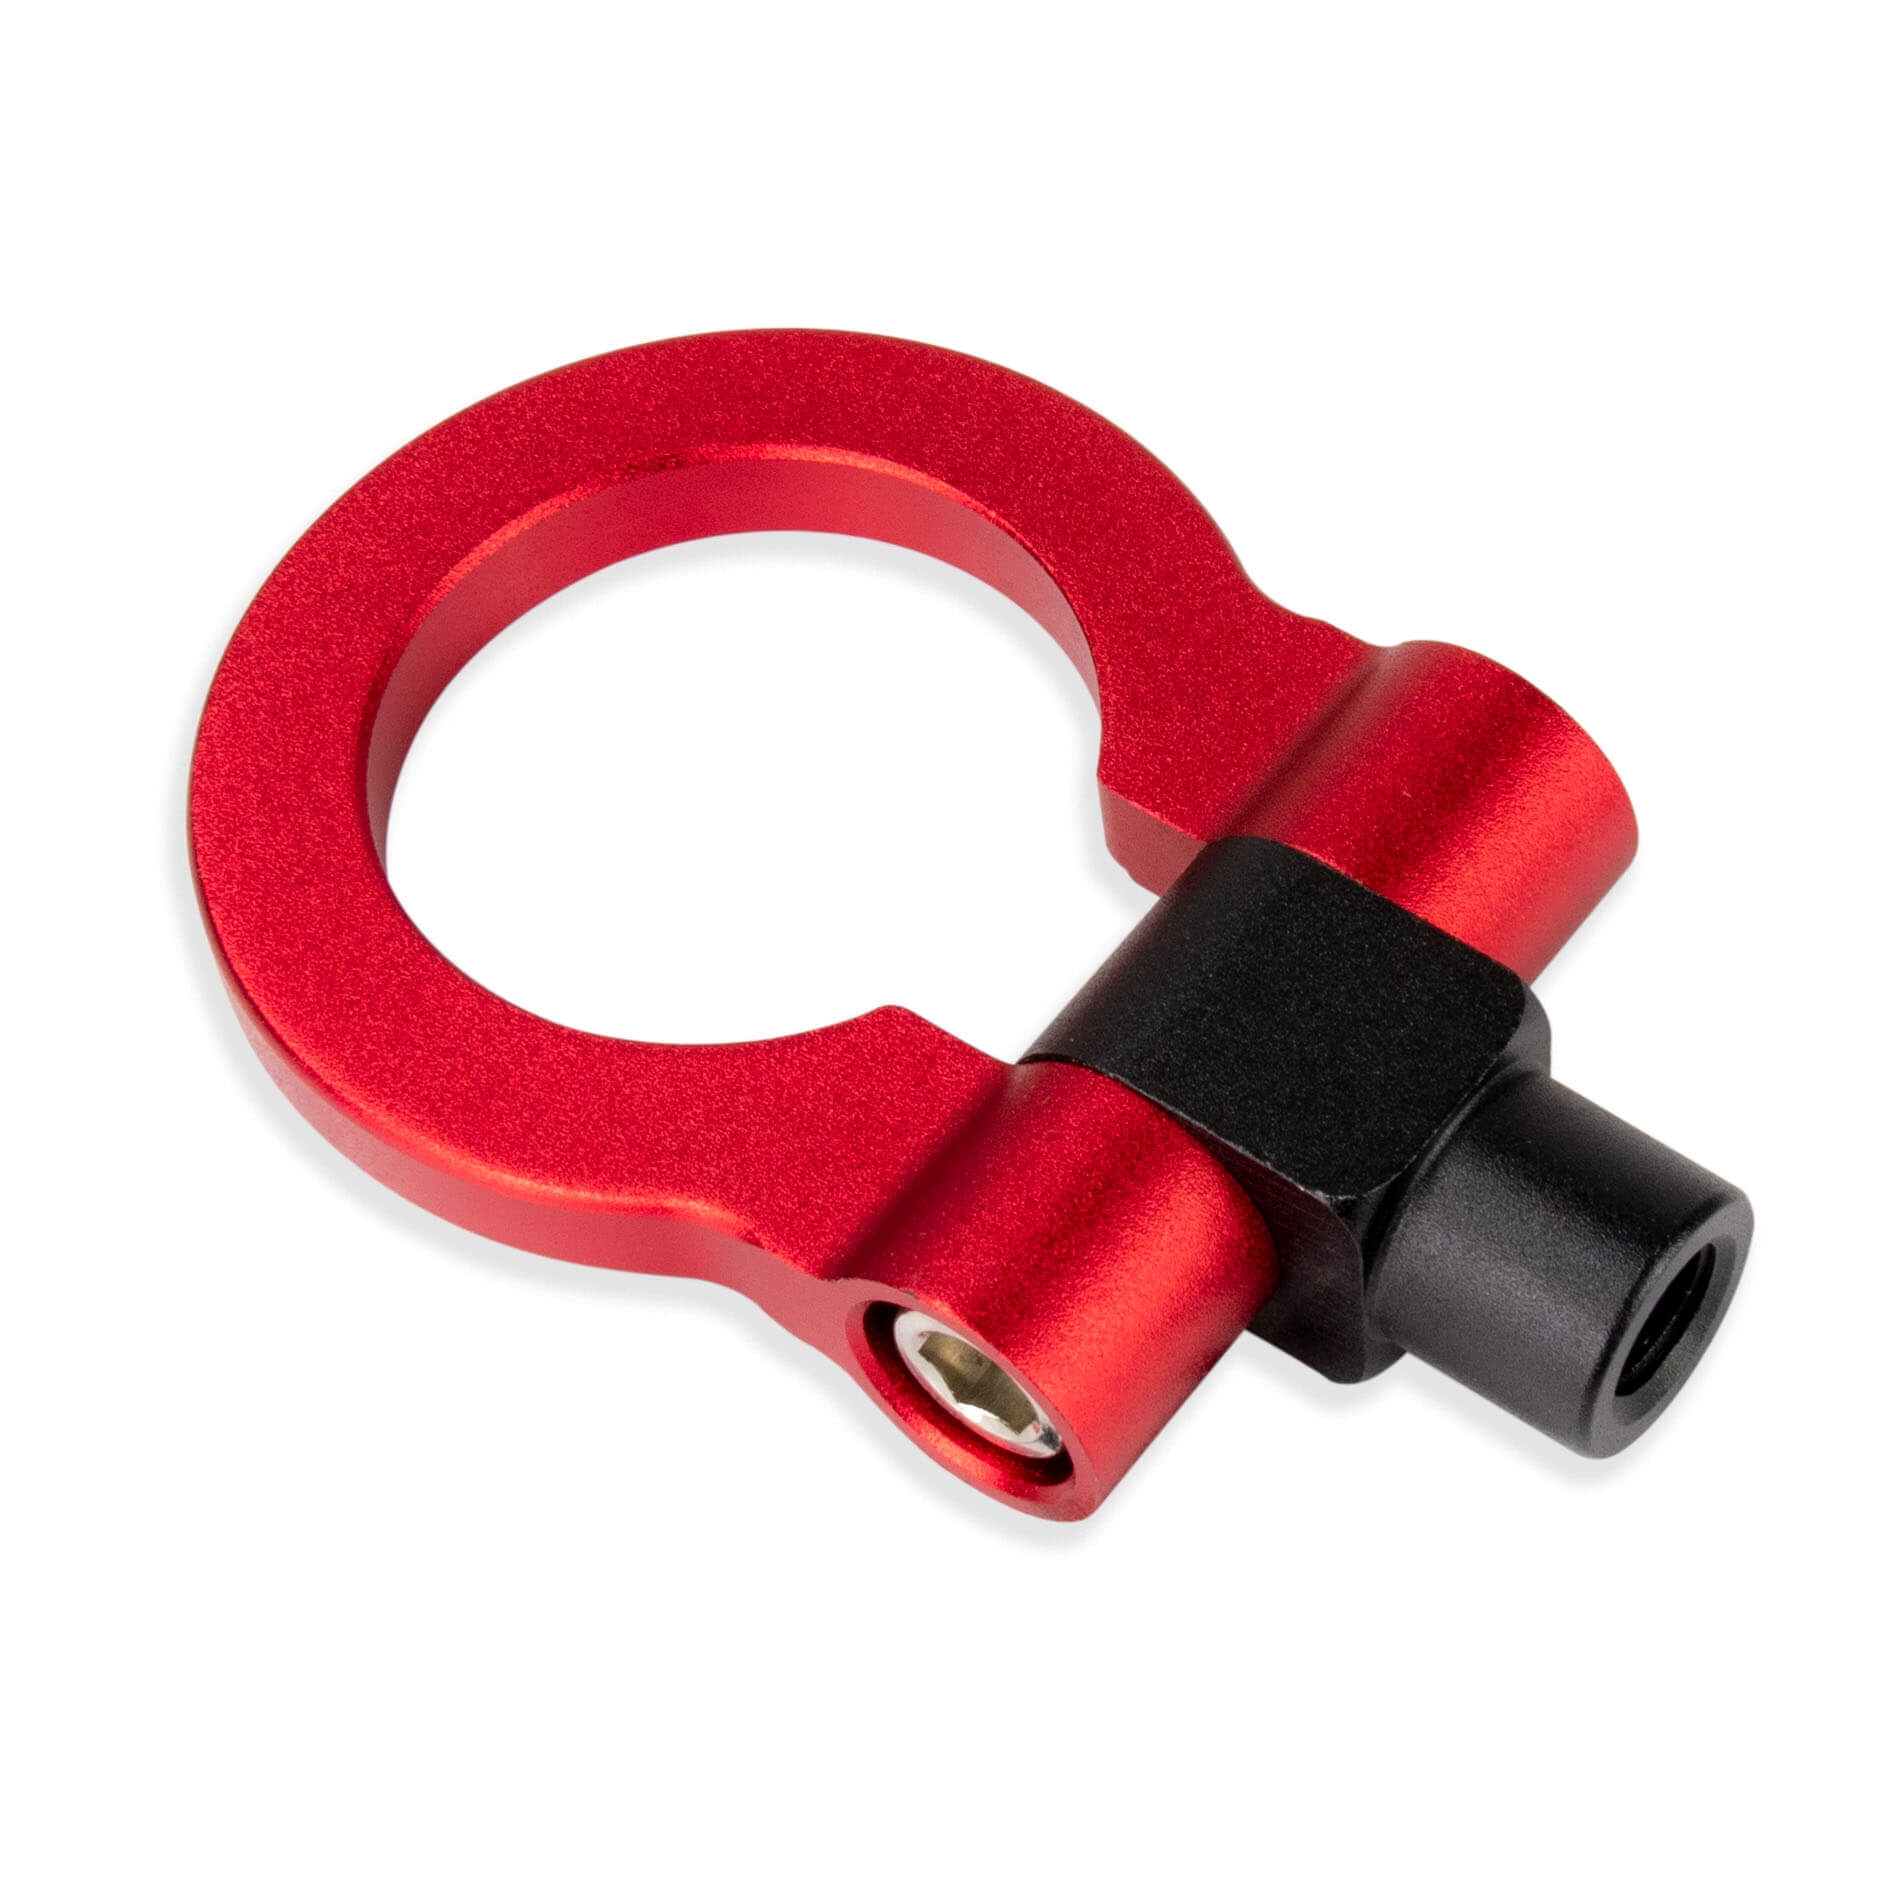 Rev up Your Motorsport Performance with Aluminum Tow Hook!